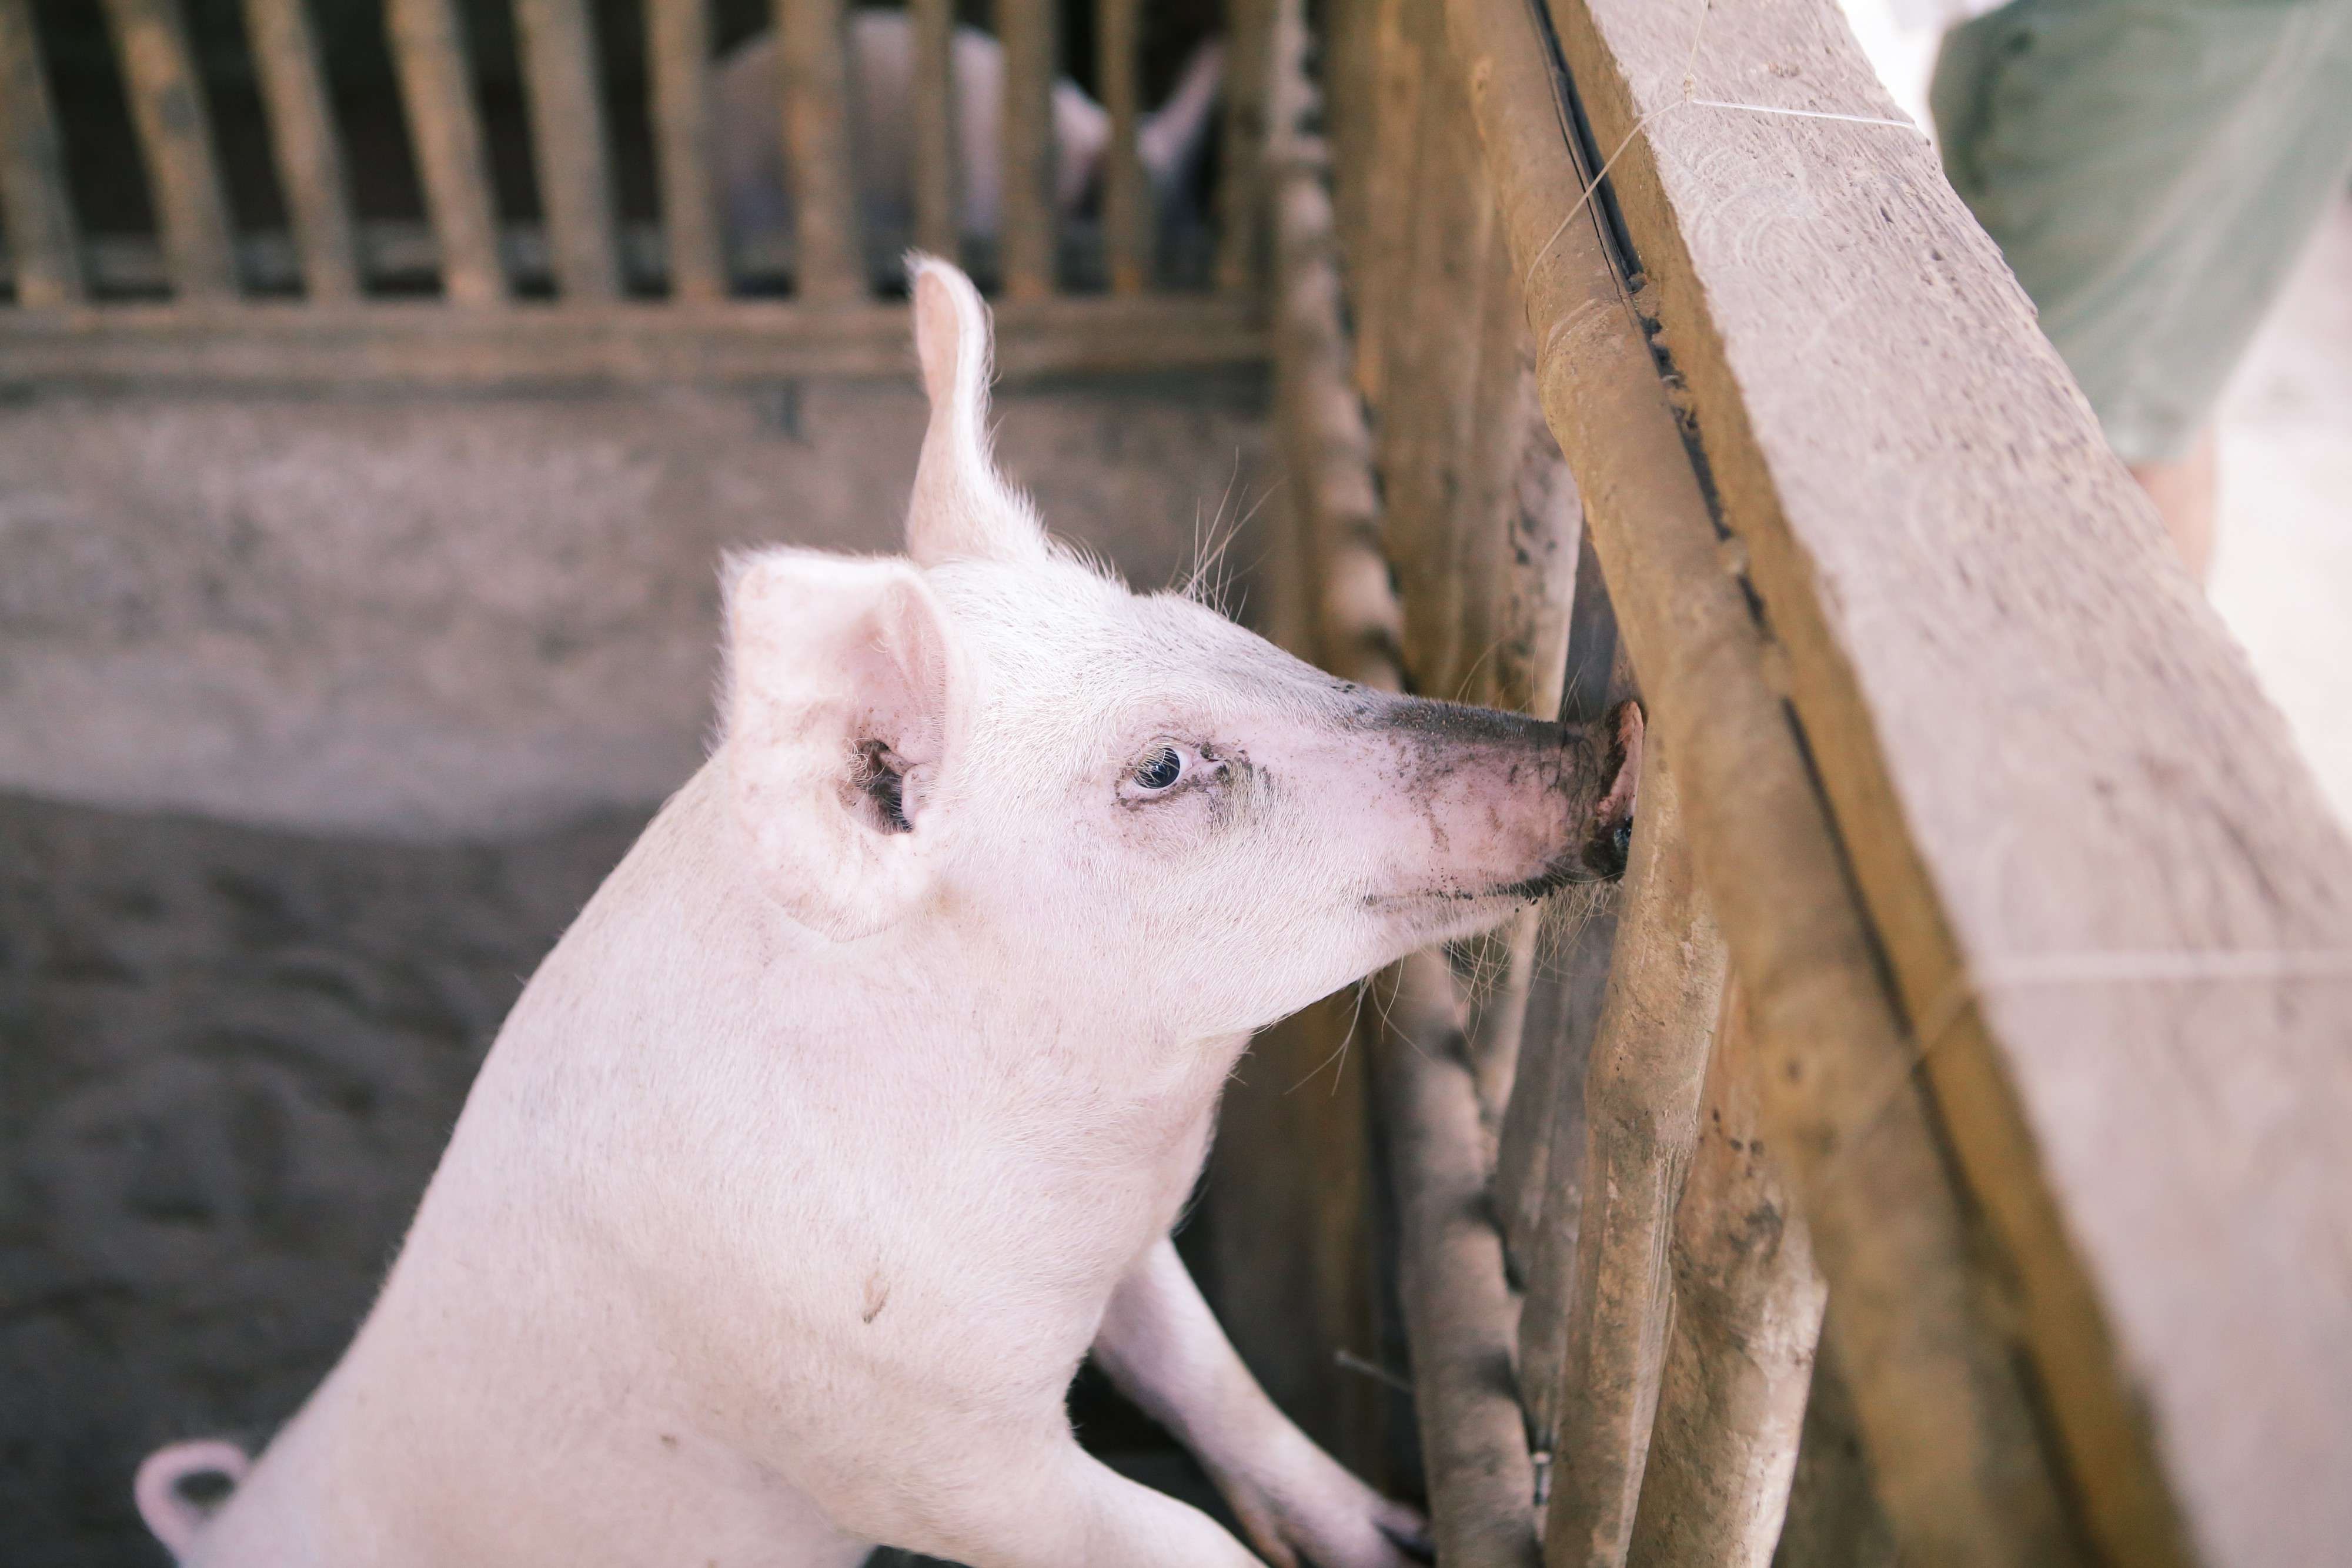 Growing produce and raising its own livestock is part of Tao’s mission to secure its food supply; for example, pigs are raised for food to address the problem of overfishing. Tao also researches and develops sustainable farming practices.